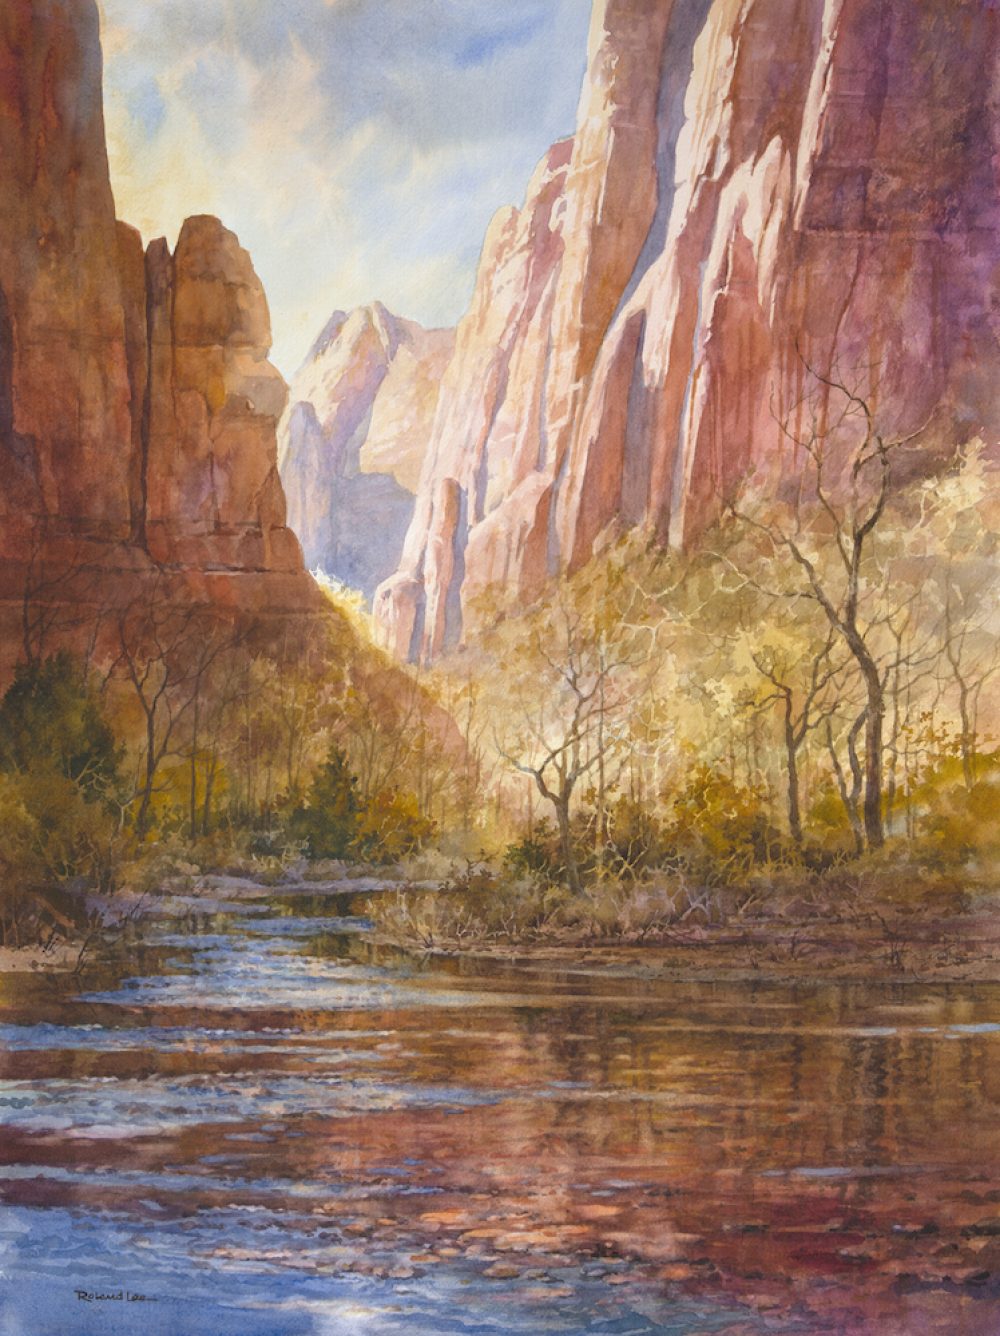 River of Time - Giclee Print - Giclee print from original watercolor painting of Zion National Park